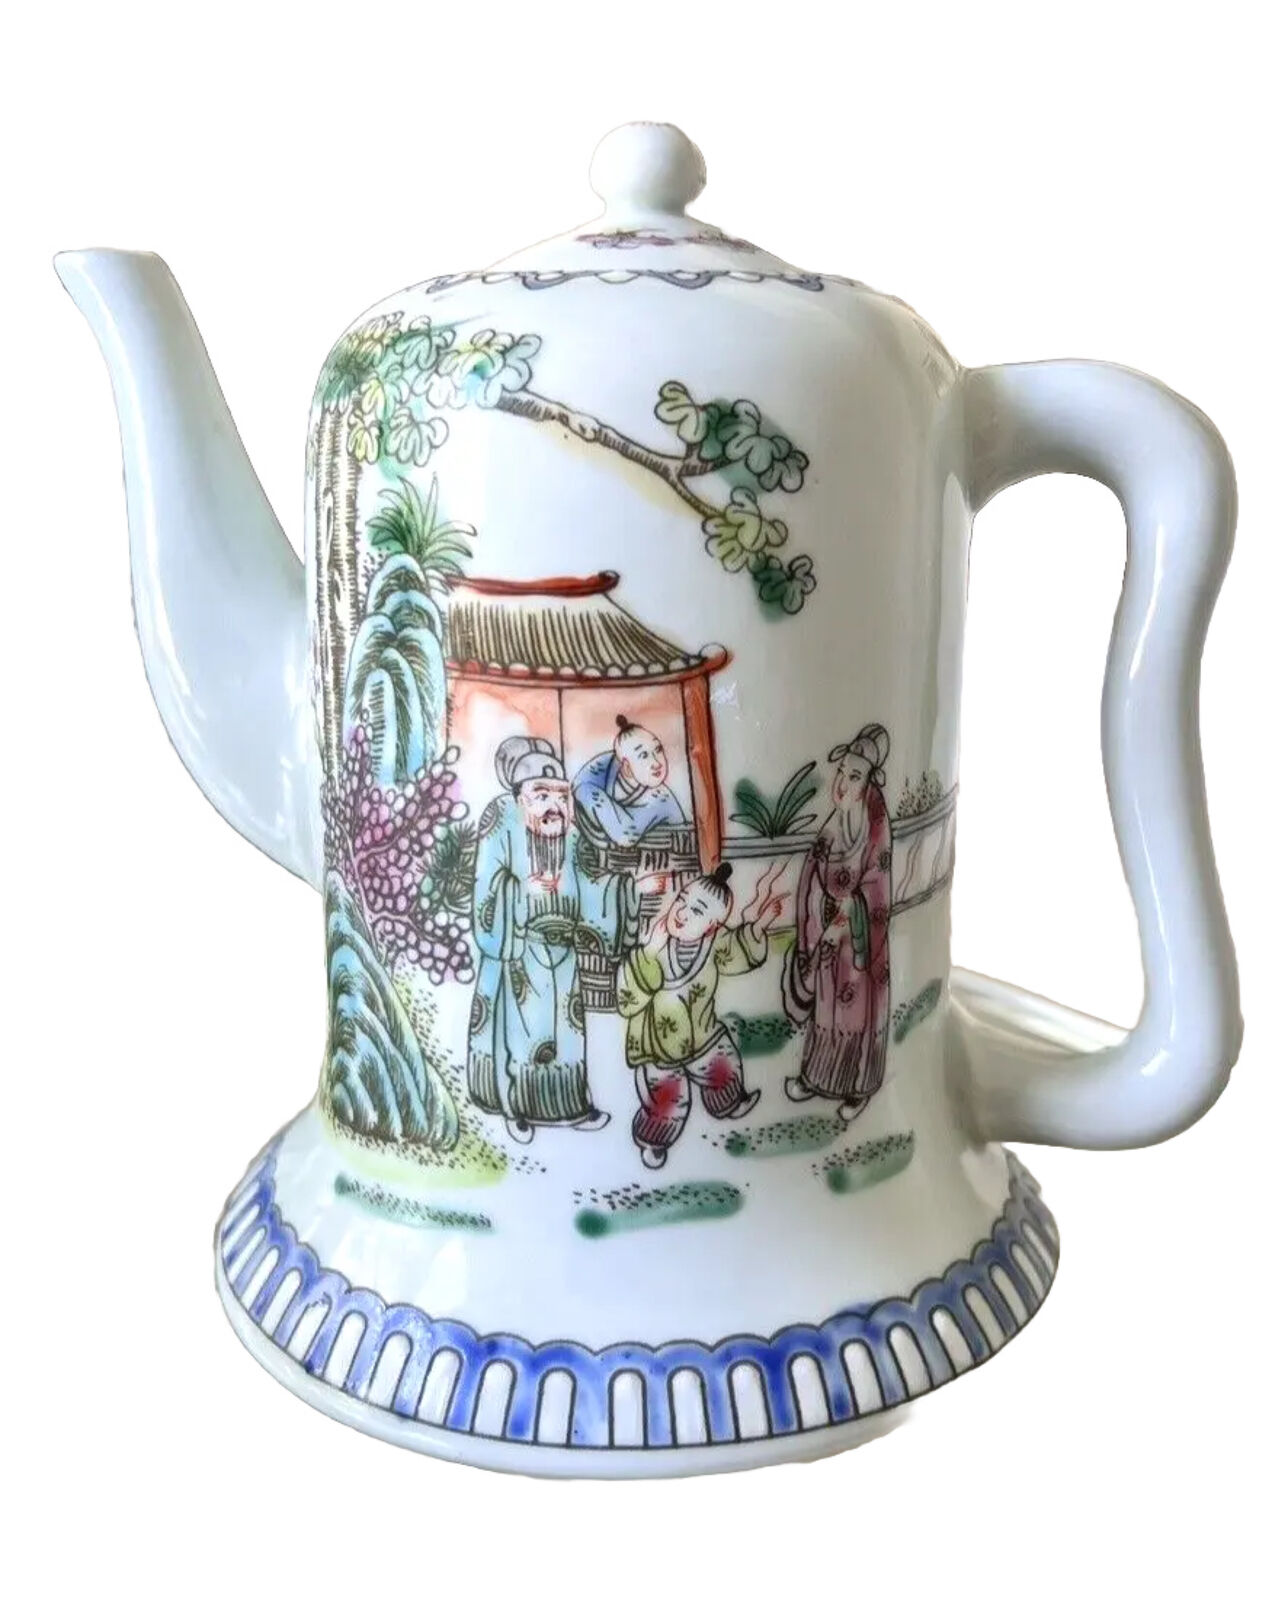 Vintage Painted Small Teapot Marked on the bottom